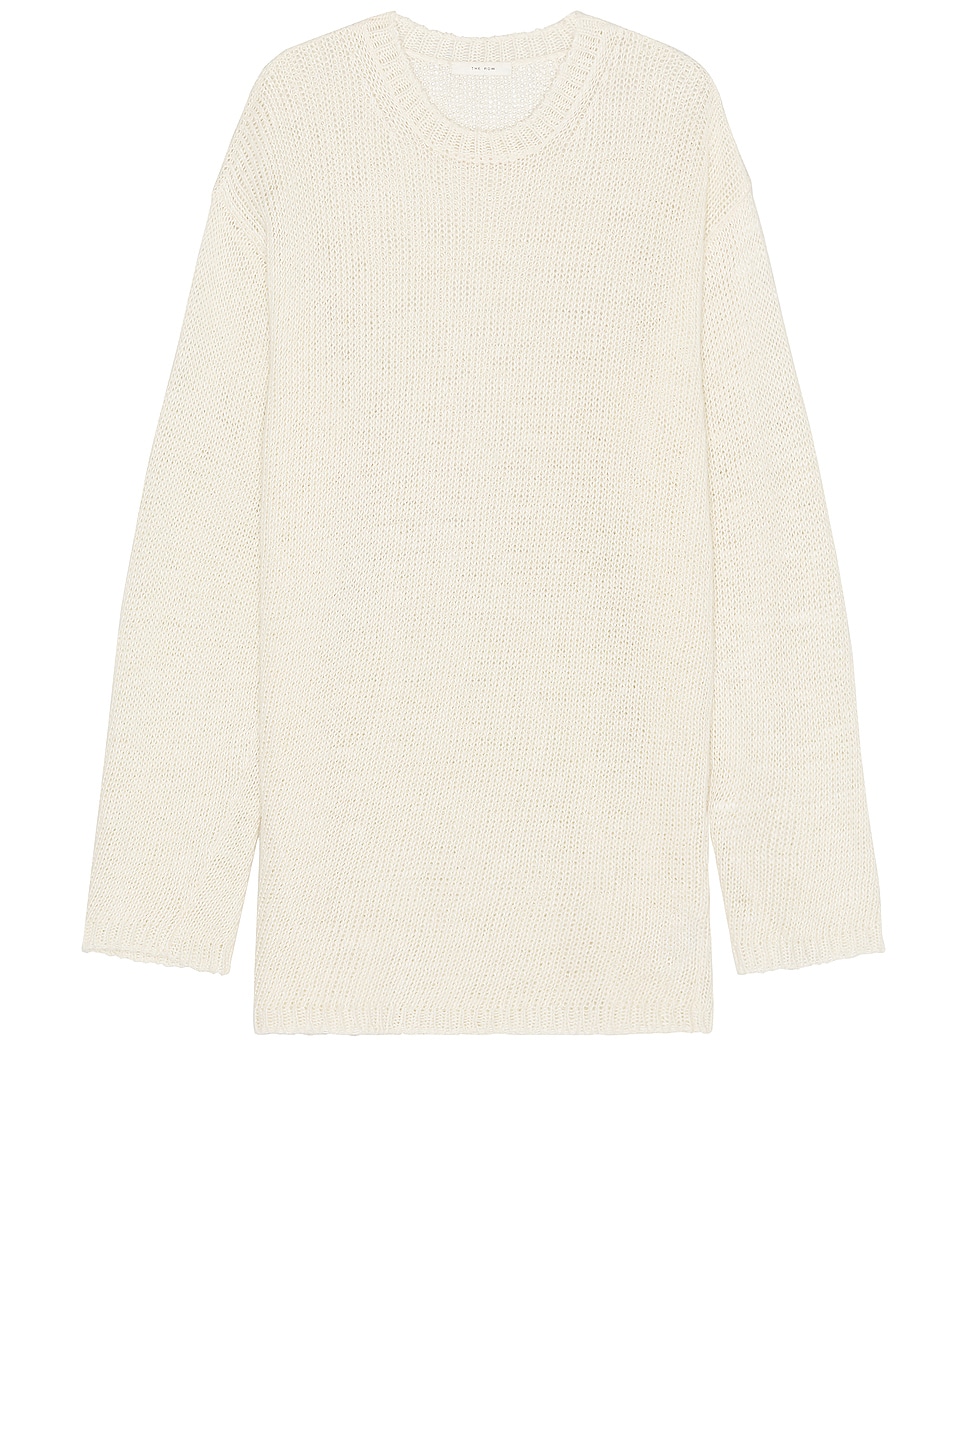 Image 1 of The Row Hank Top in Off White